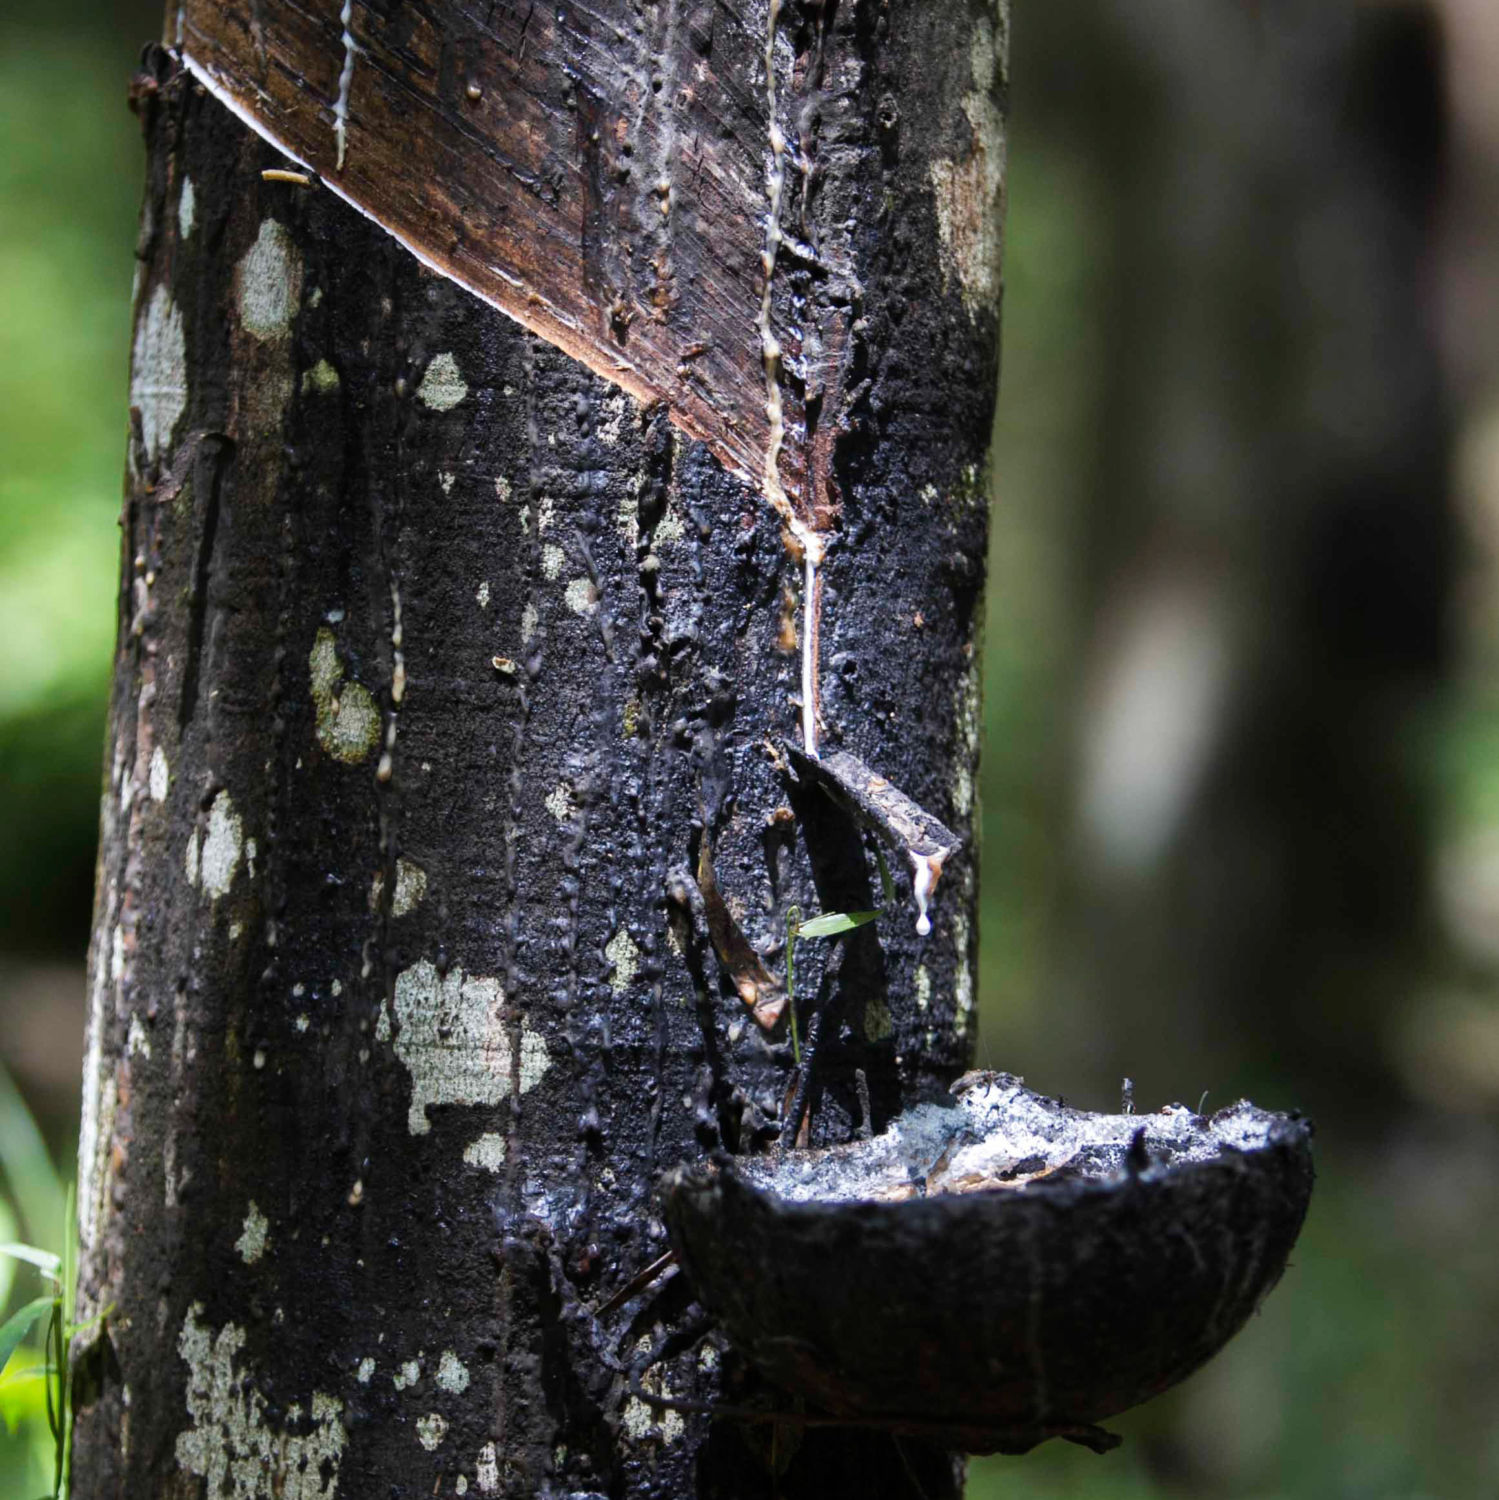 How Mounting Demand for Rubber Is Driving Tropical Forest Loss